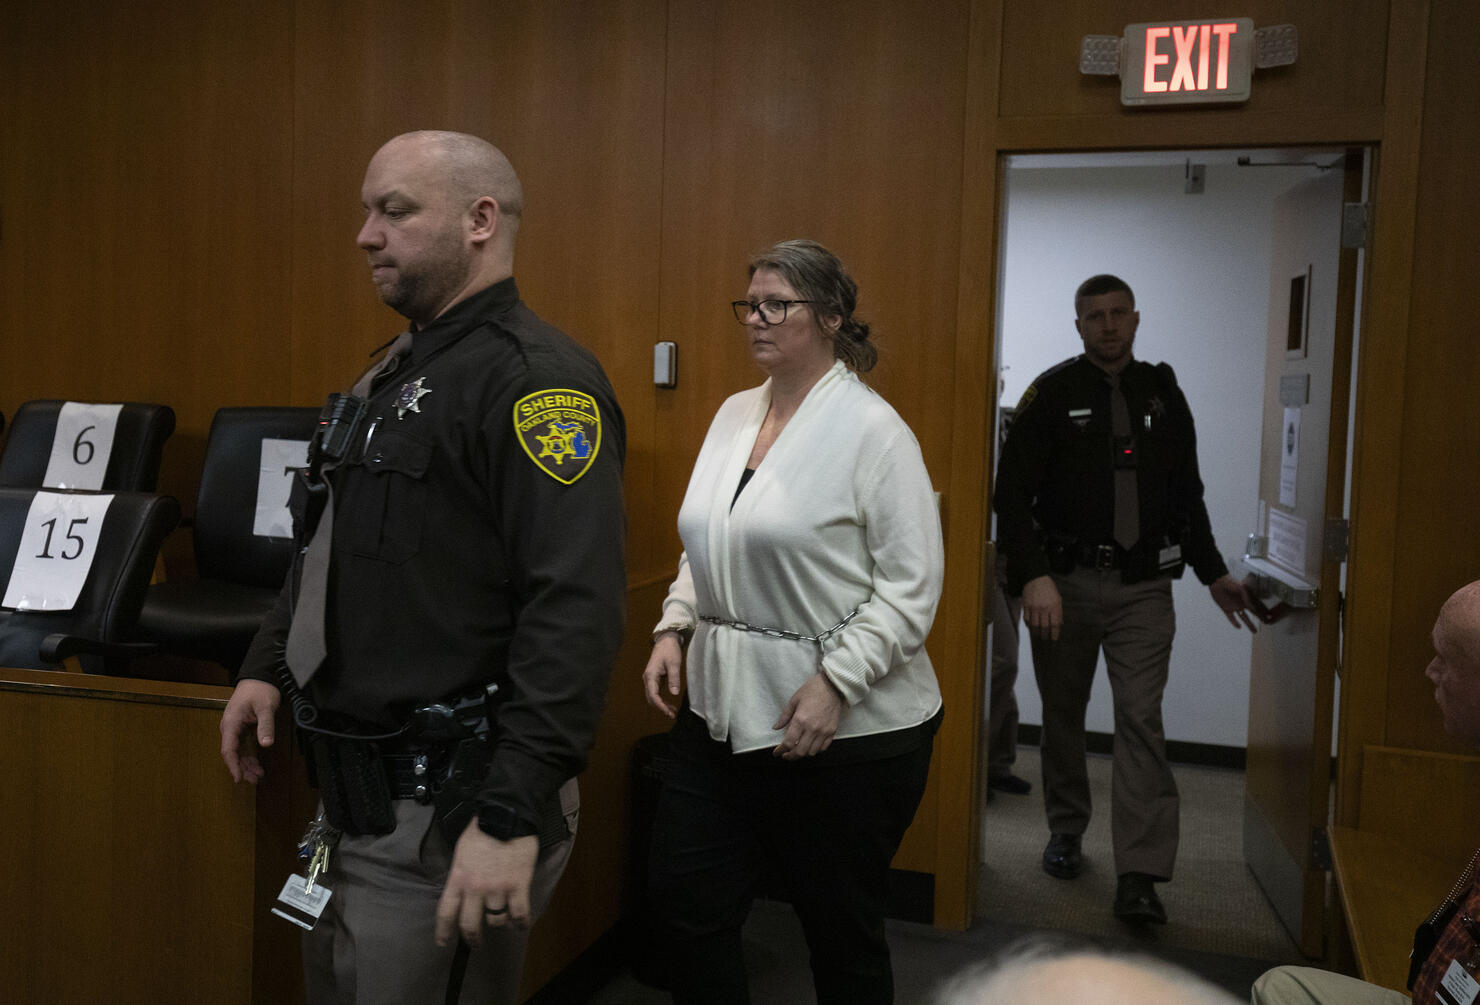 Jury Deliberates In Manslaughter Trial For Jennifer Crumbley, Mother Of Oxford, Michigan School Shooter